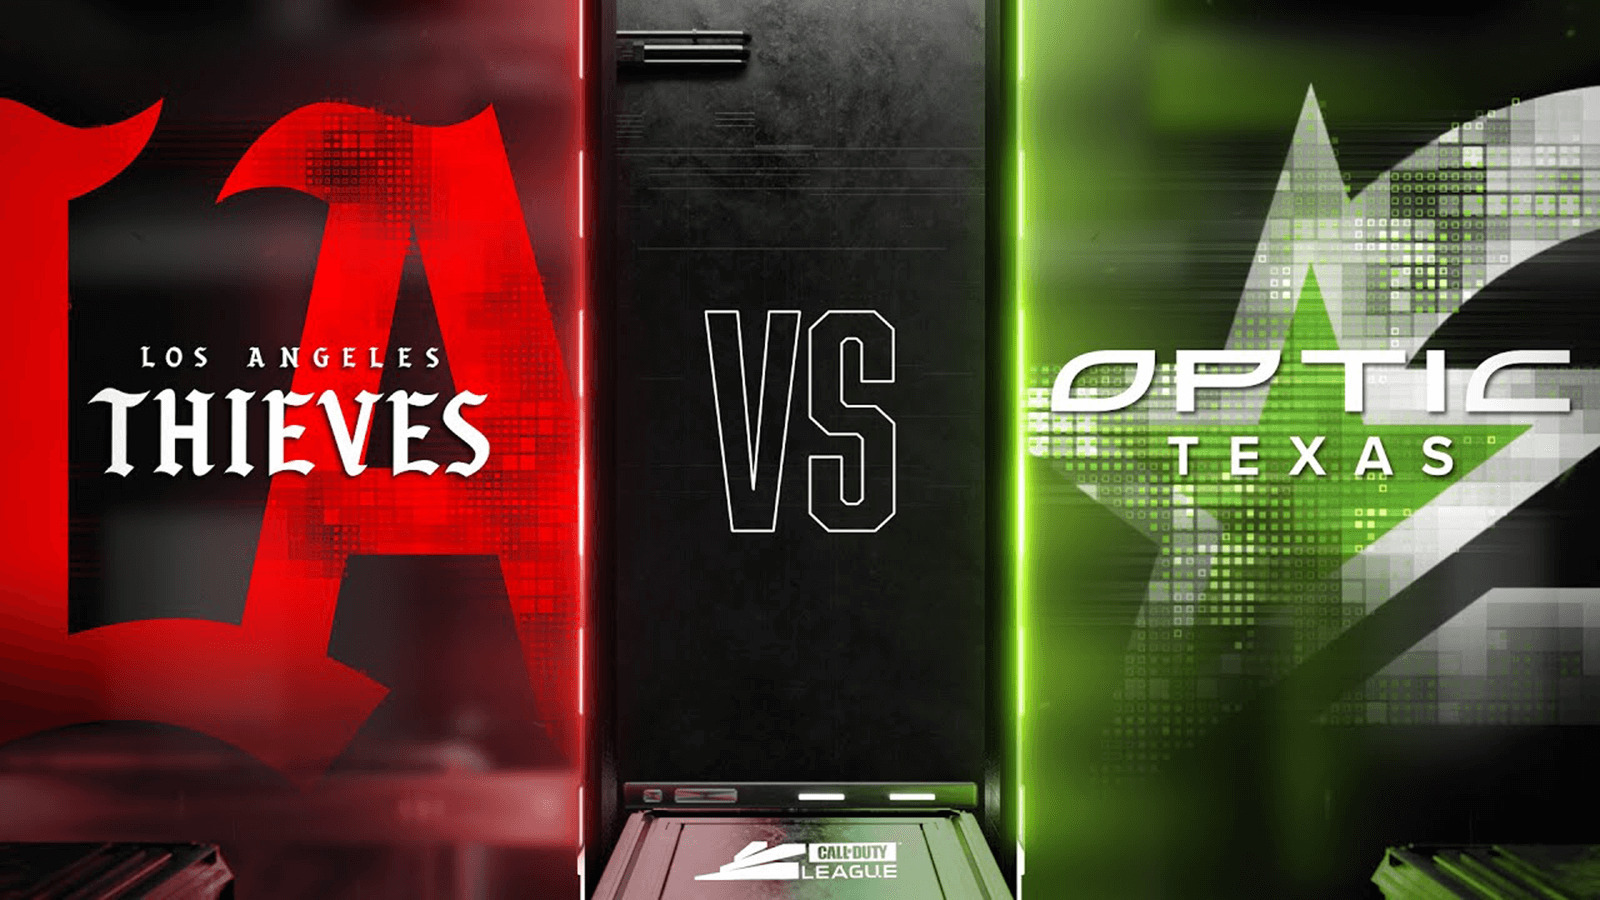 OpTic Texas dominates Call of Duty League's Major IV qualifiers